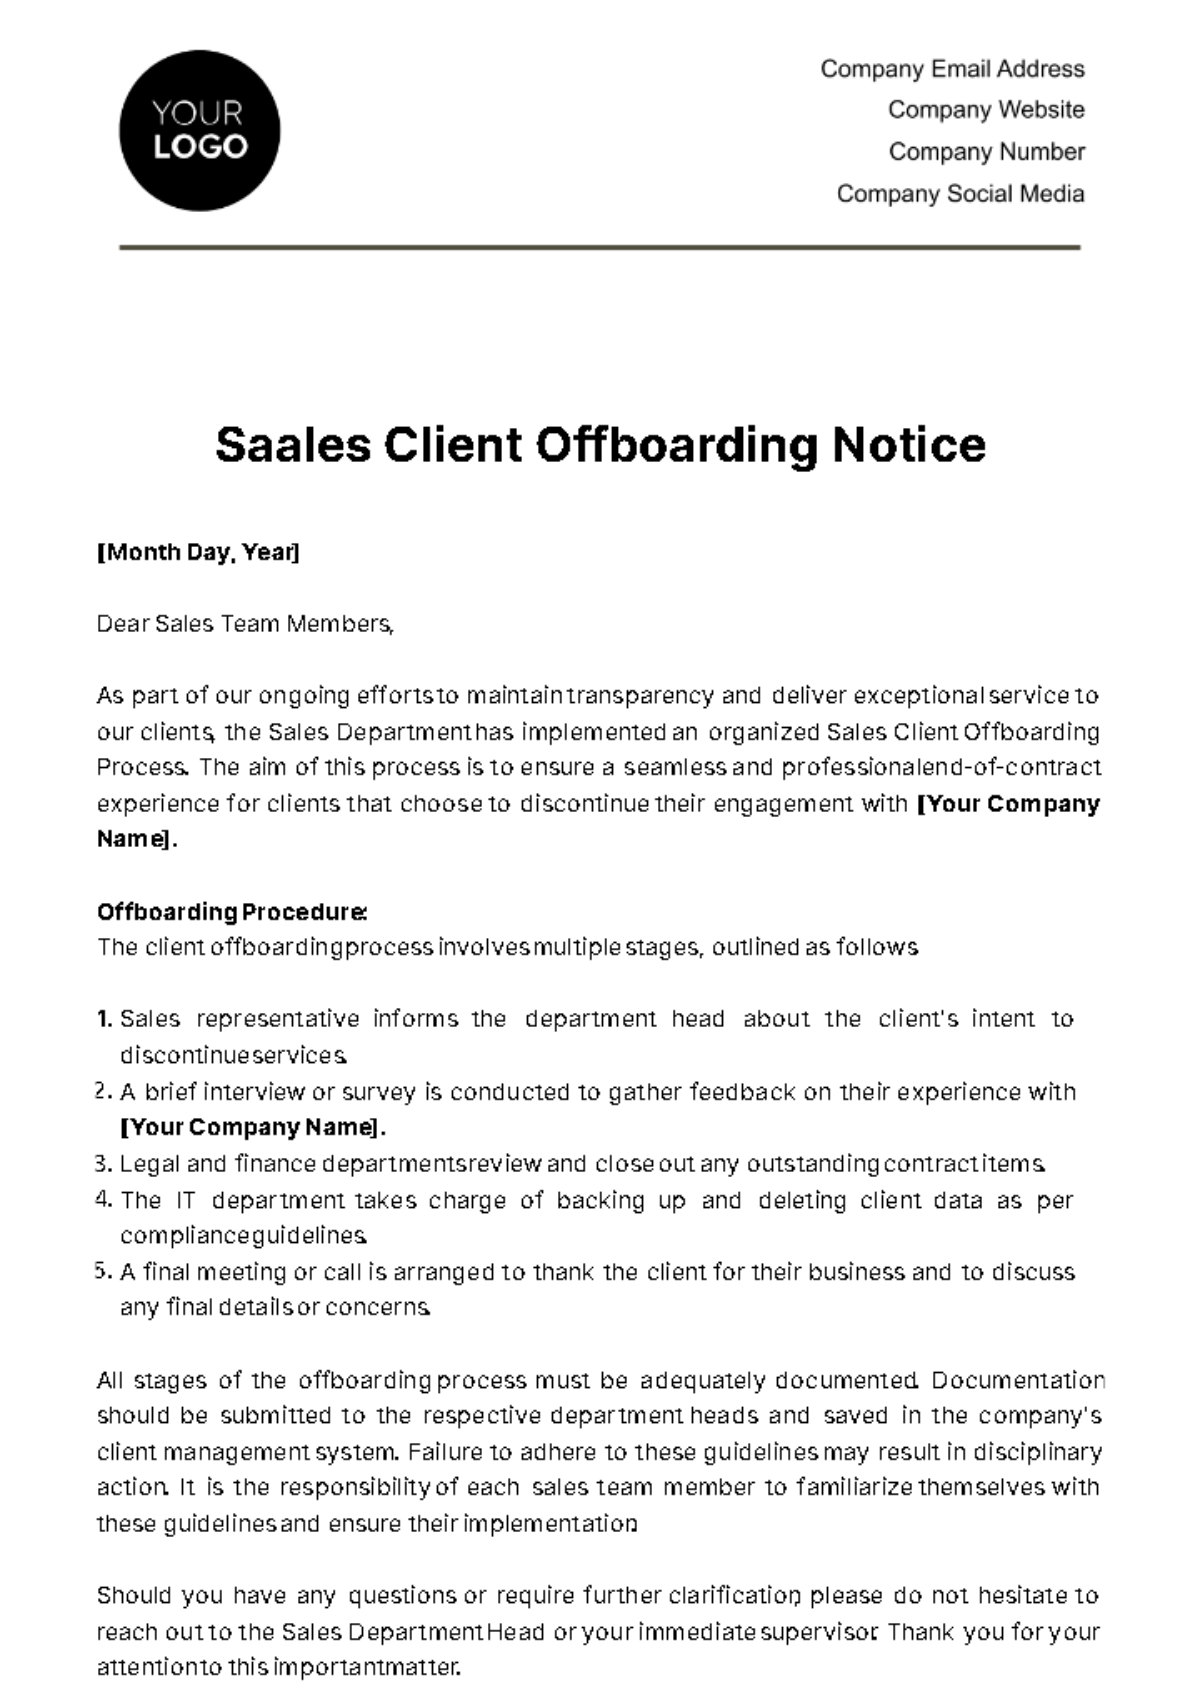 Free Sales Client Offboarding Notice Template